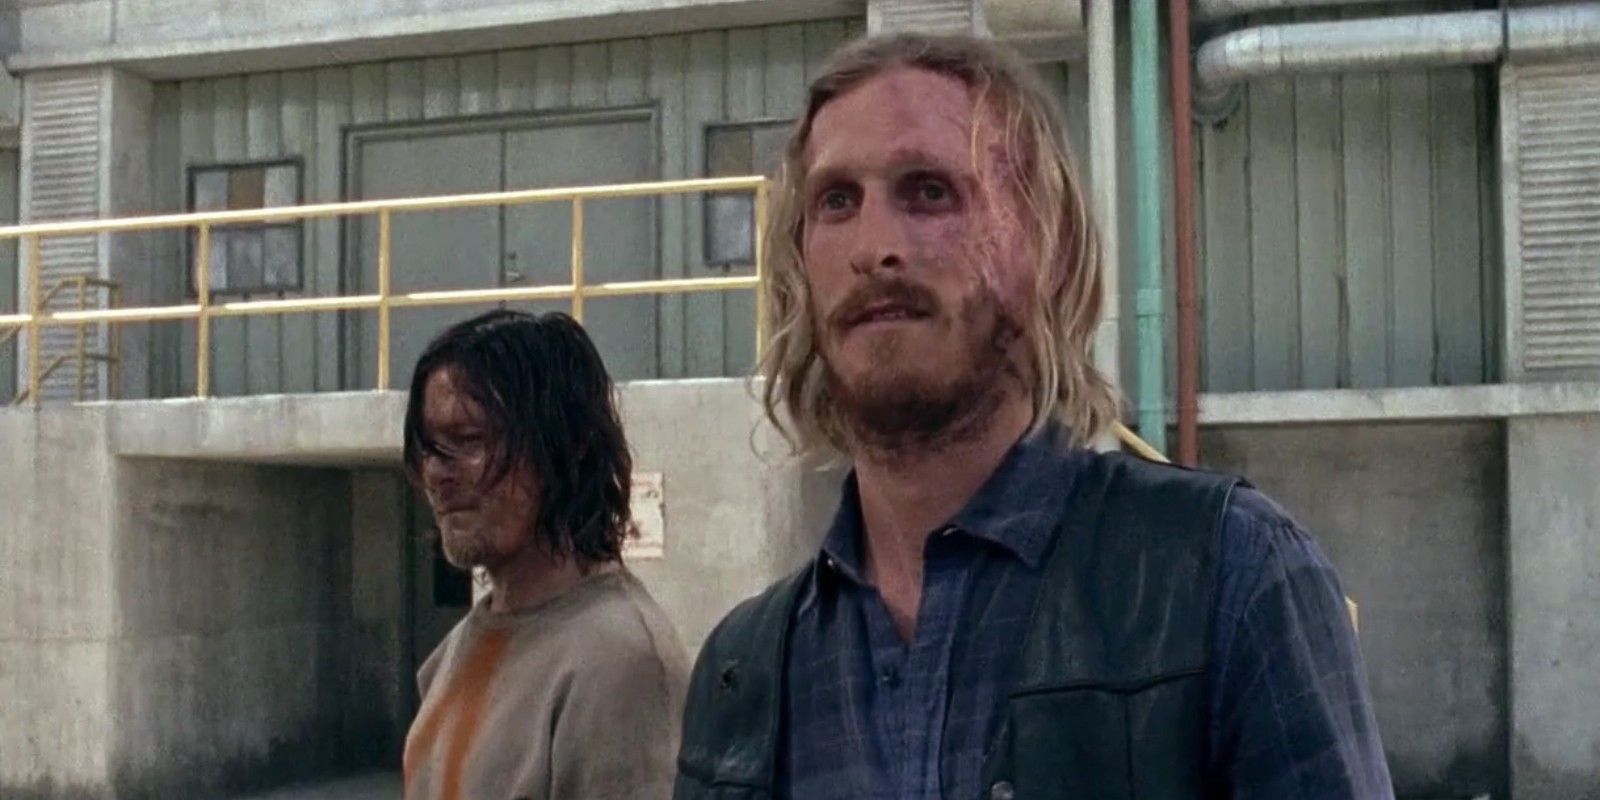 Norman Reedus as Daryl Dixon and Austin Amelio as Dwight in The Walking Dead